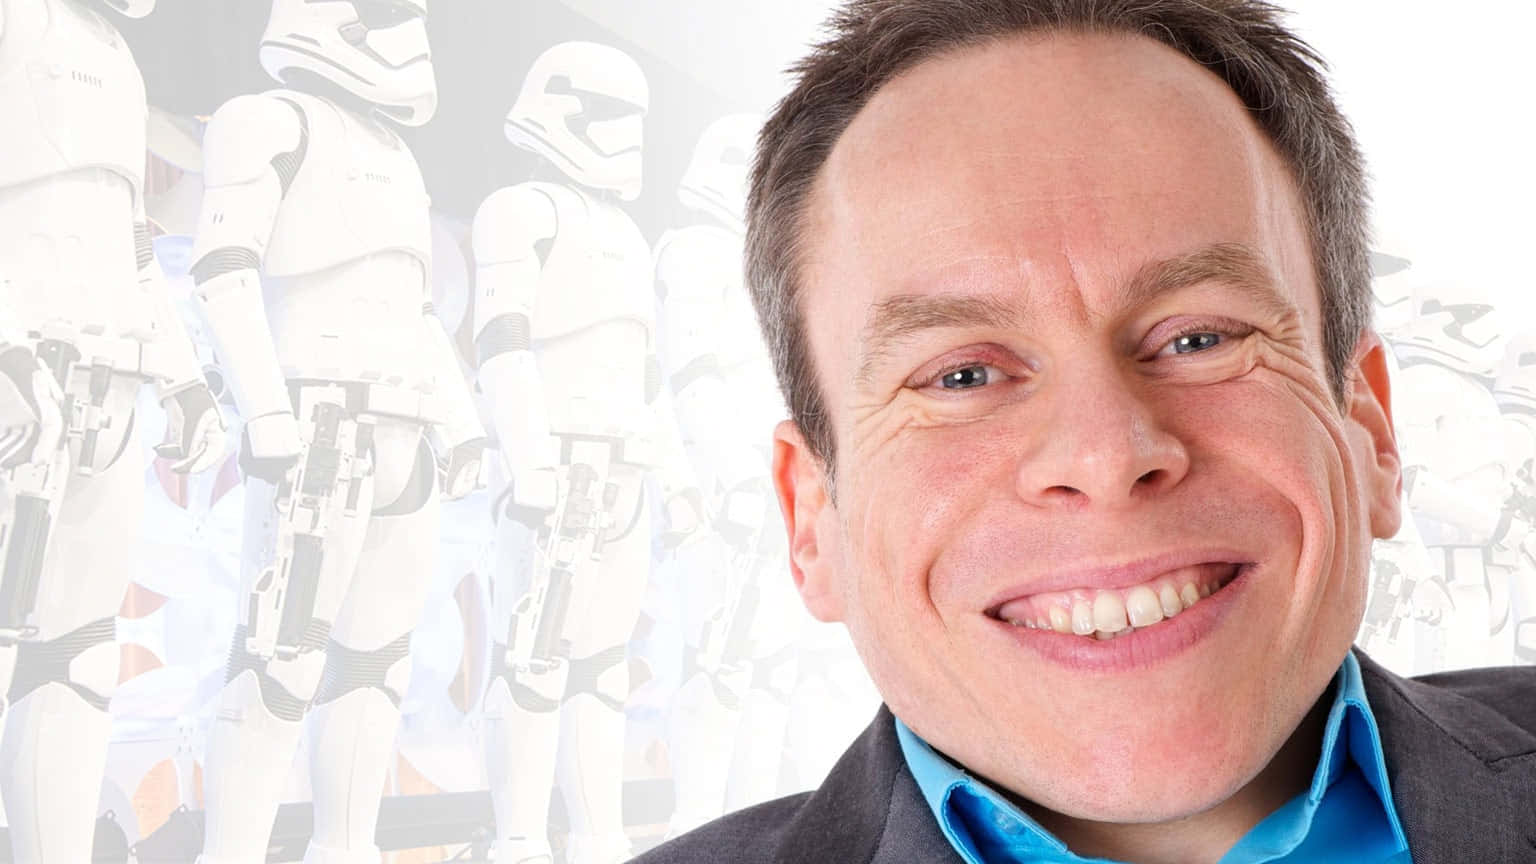 Warwick Davis posing with confidence at a public event Wallpaper